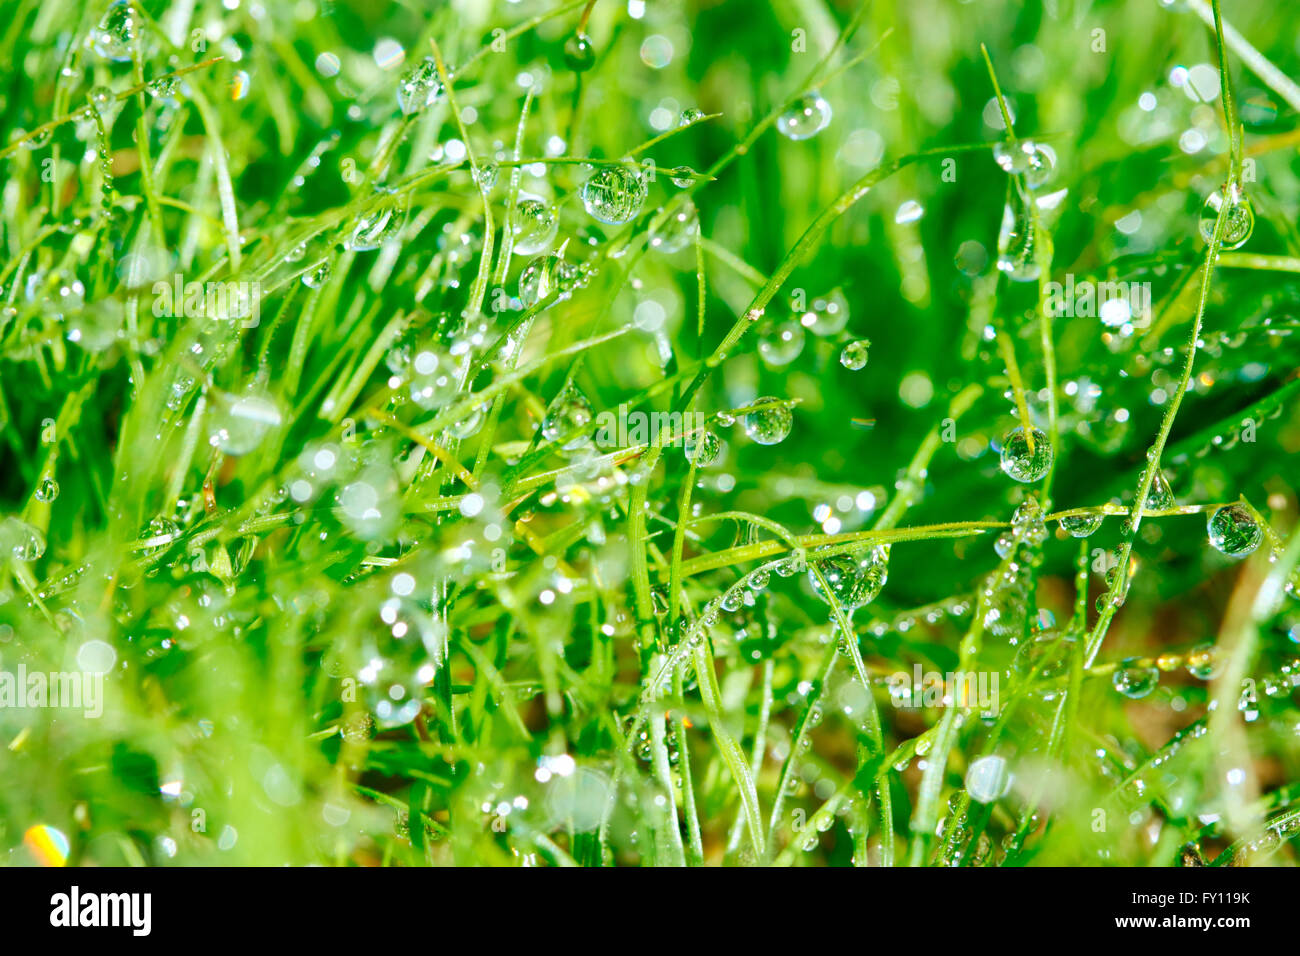 Dewdrop on green grasses Stock Photo